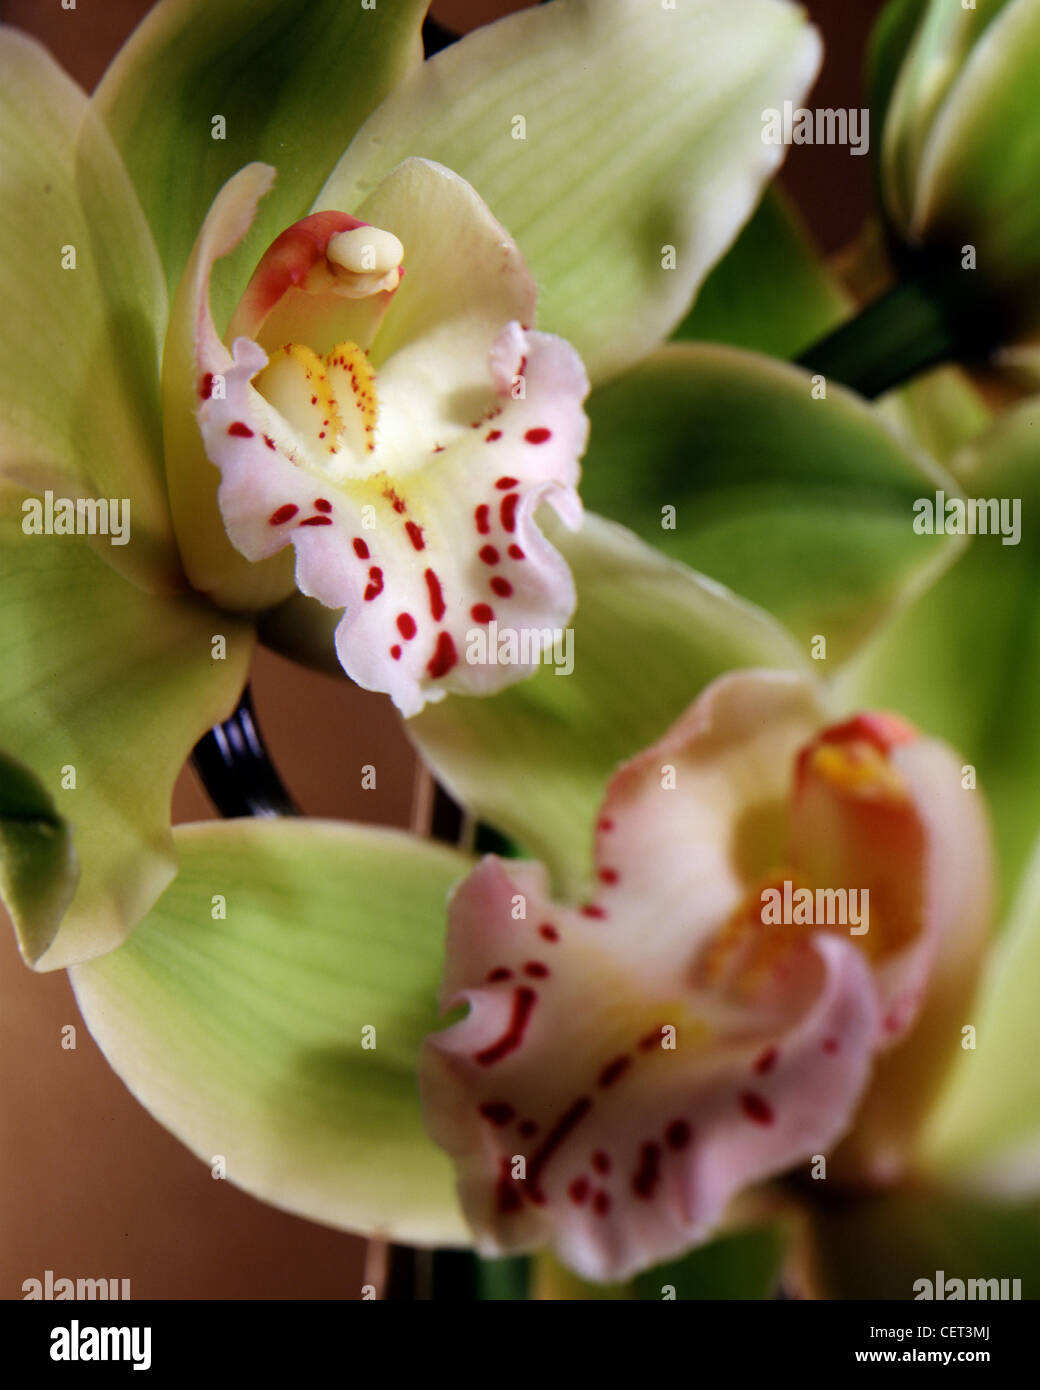 Green Cymbidium Orchids, two in close-up studio vertical photograph.  Shallow focus, tight crop. From the Orchidaceae family. Stock Photo